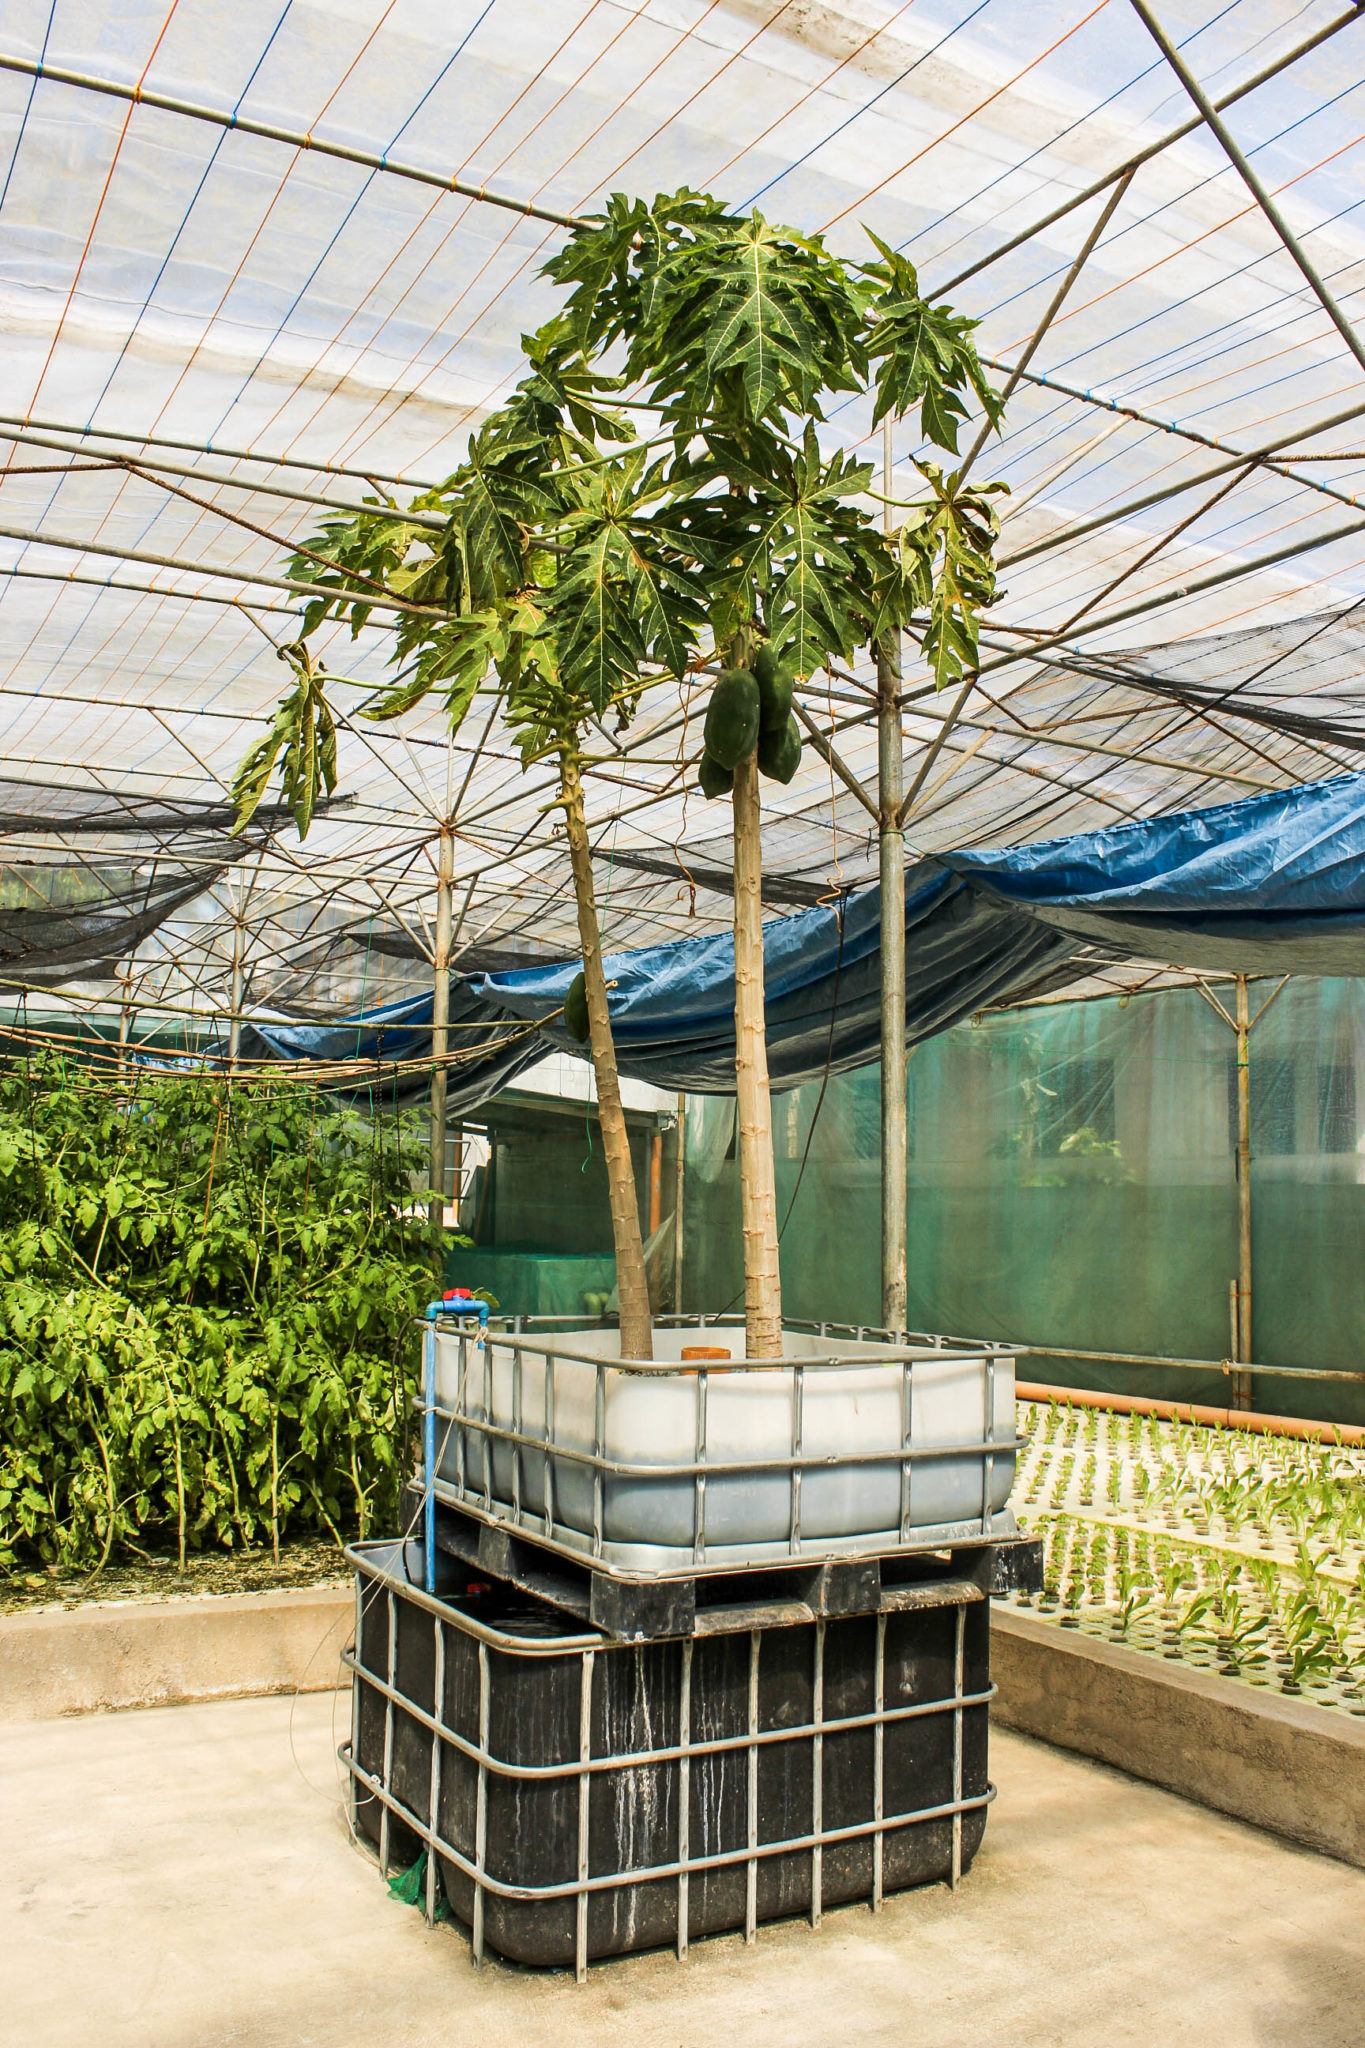 Agricultural startup Basilio's Aquaponics Farm is also experimenting with a gravel grow bed system where they’re currently growing papaya trees